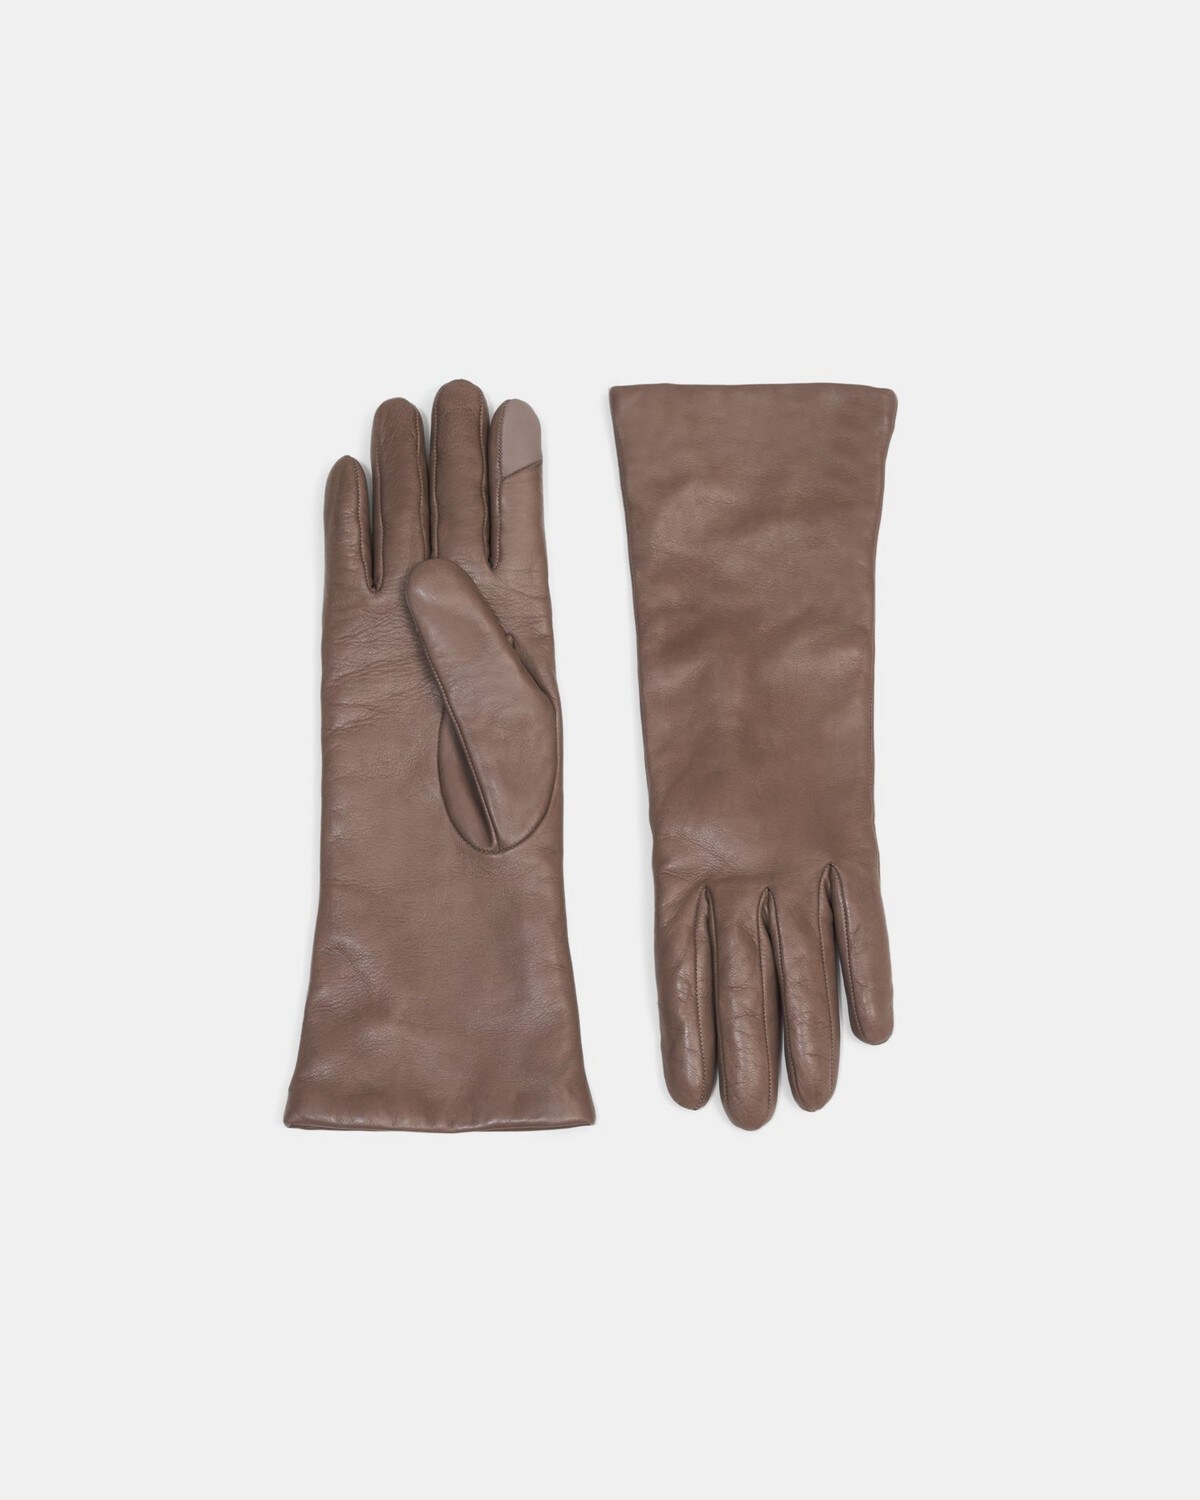 Theory Tech Gloves in Leather